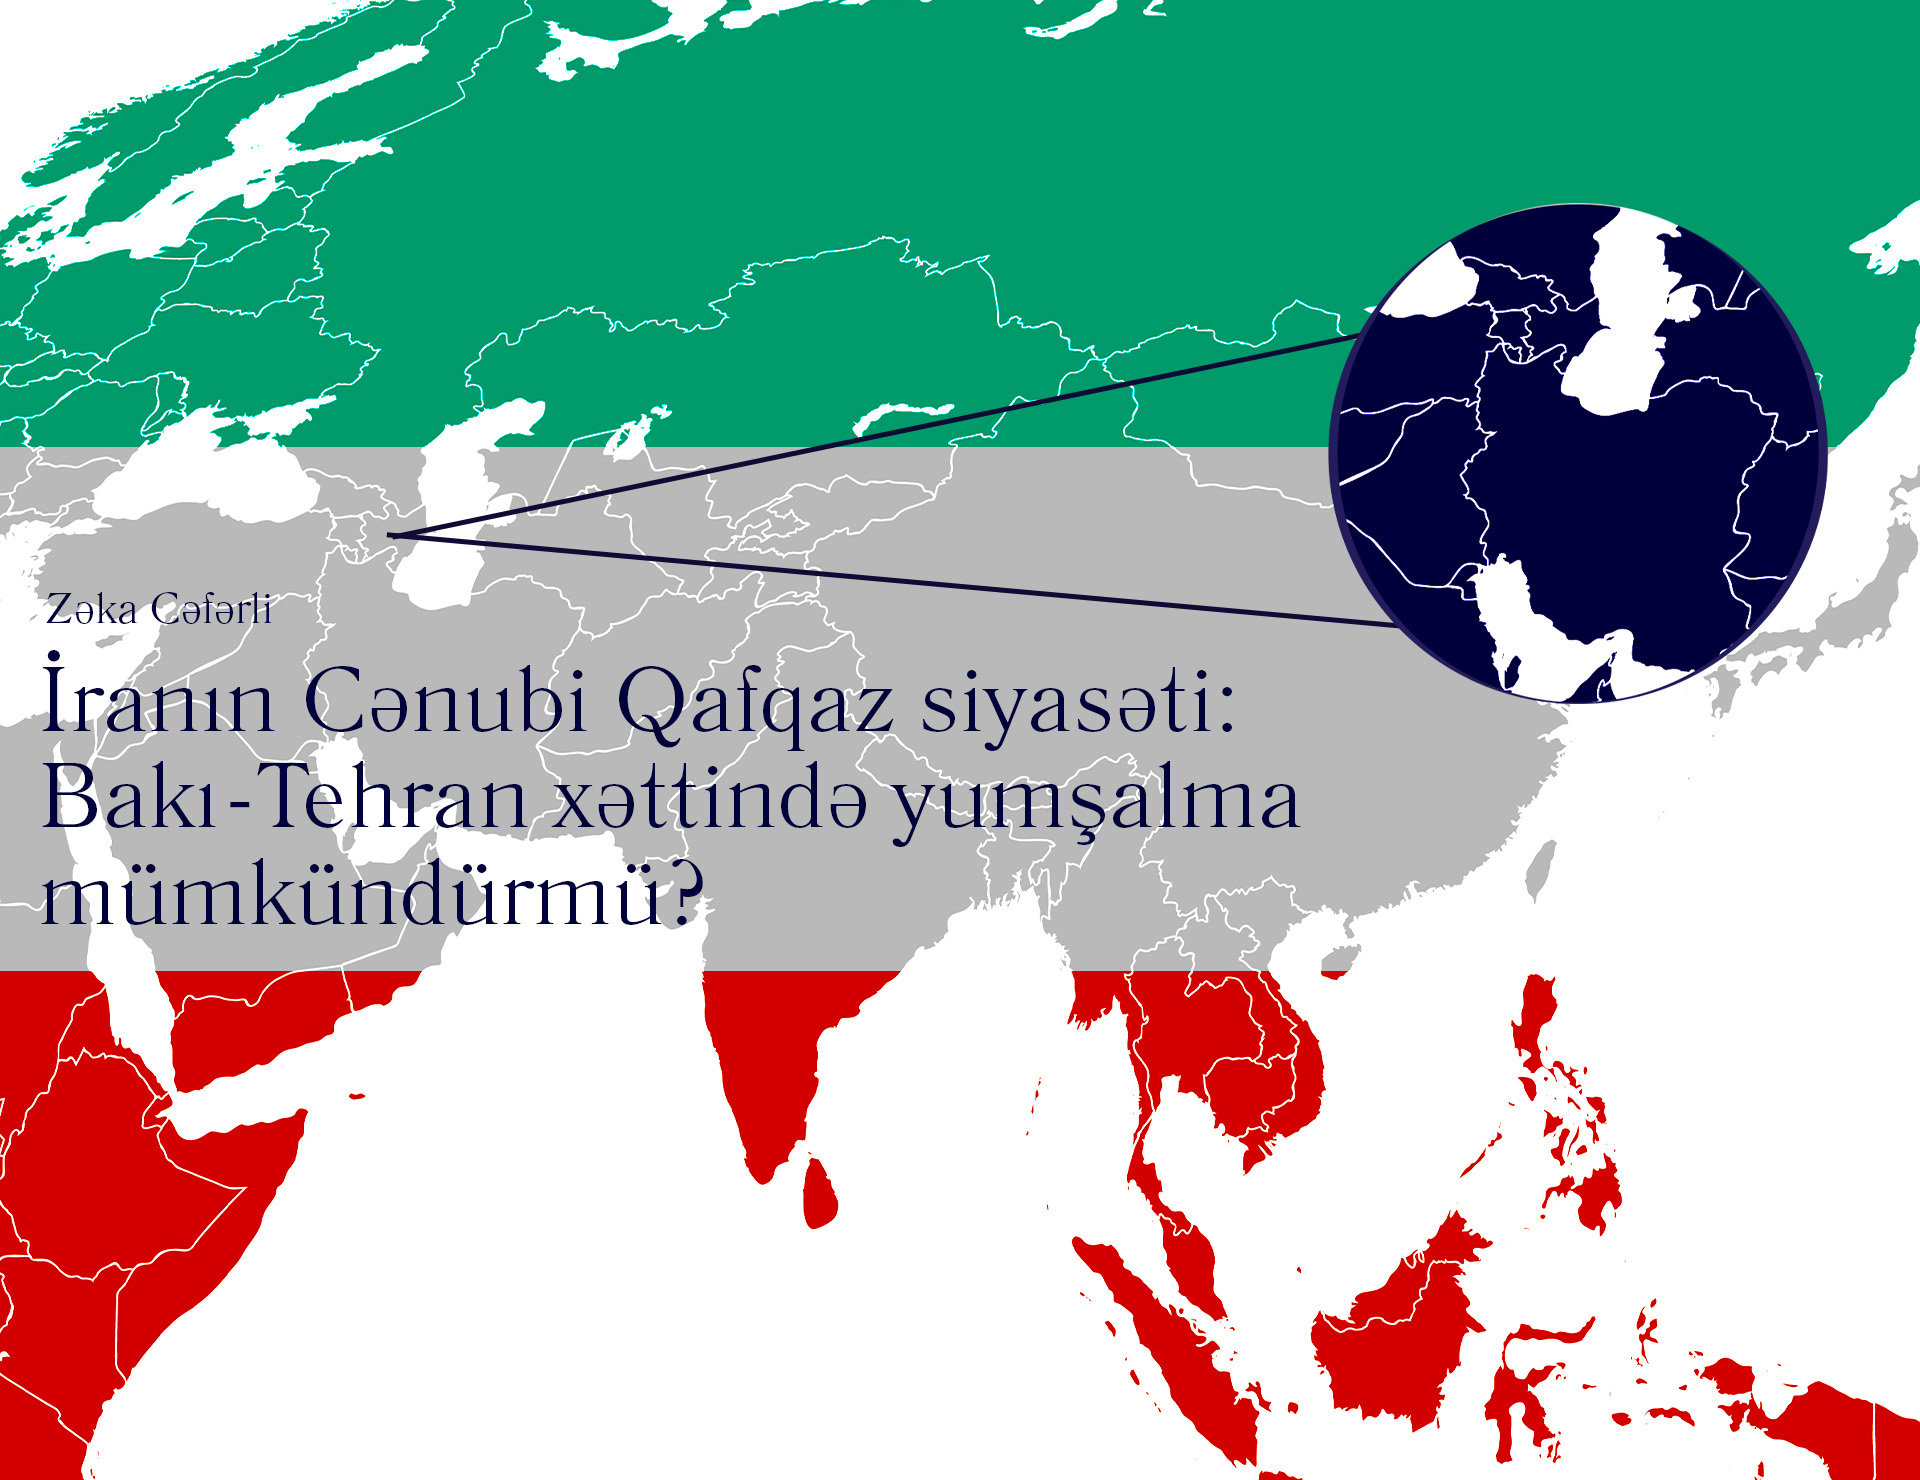 Iran's South Caucasus policy: Is softening possible on the Baku-Tehran line?